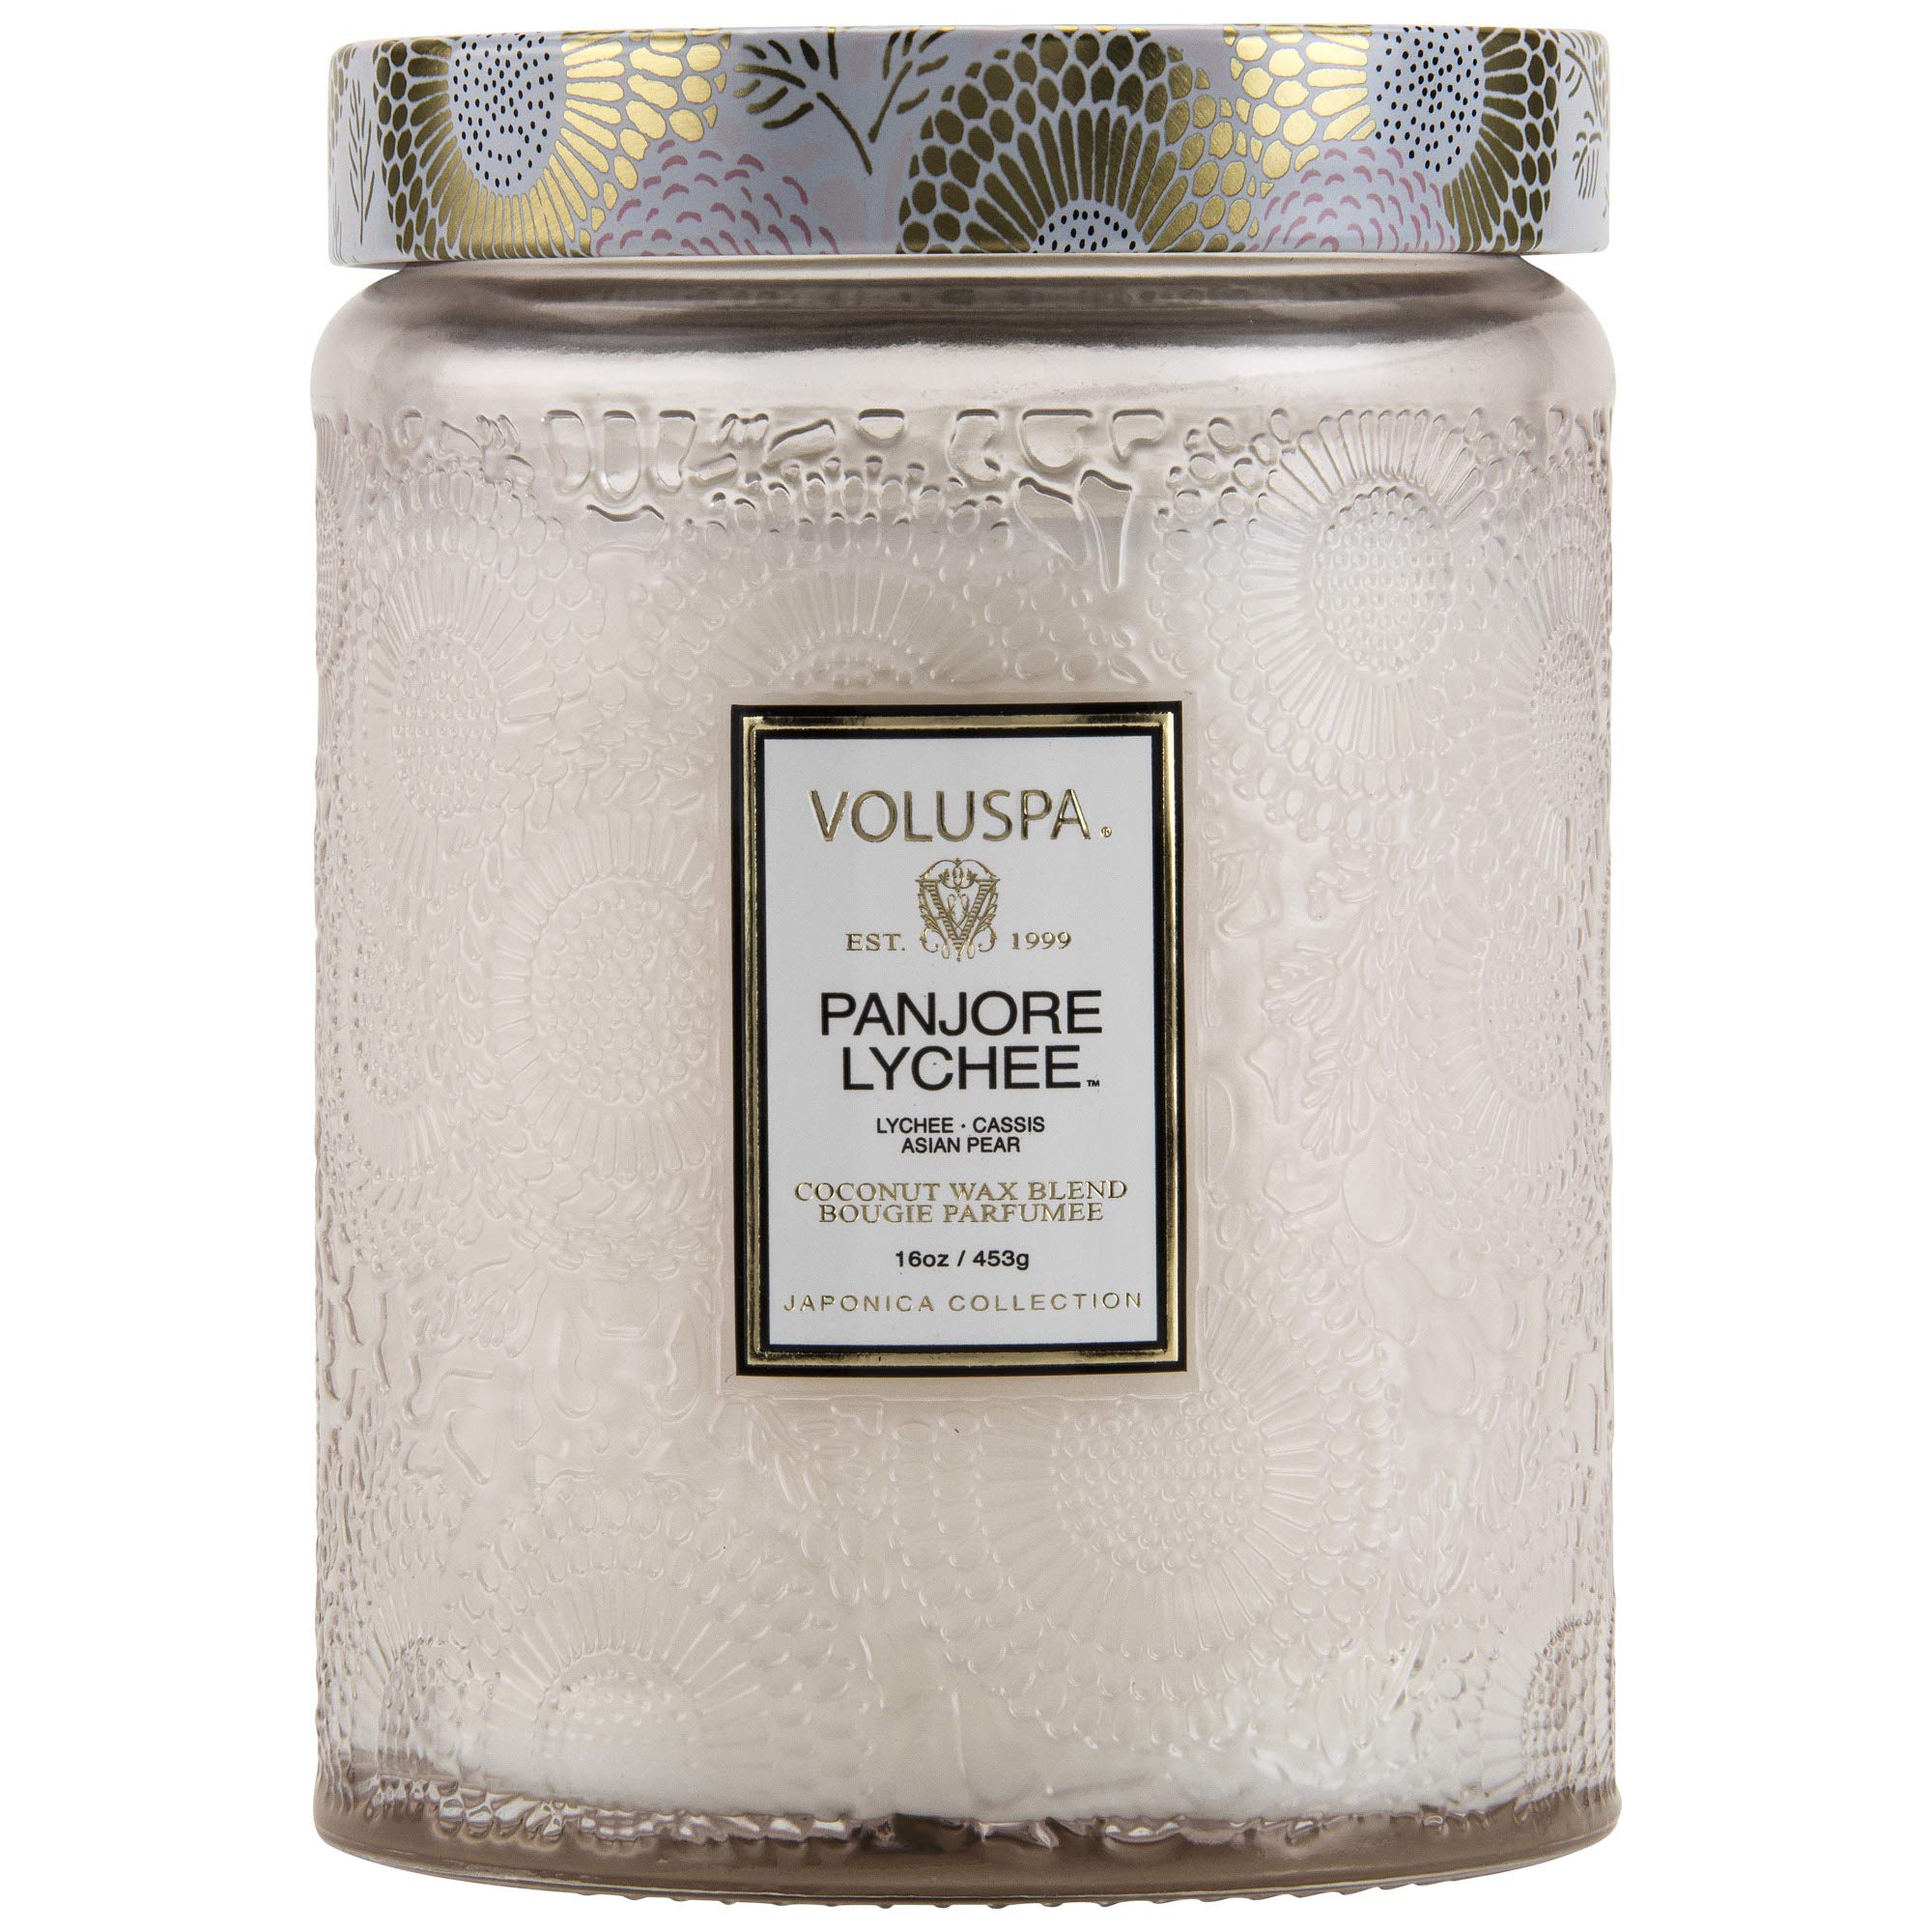 Voluspa Panjore Lychee Candle | Large Glass Jar | 18 Oz. | 100 Hour Burn Time | All Natural Wicks and Coconut Wax for Clean Burning | Vegan